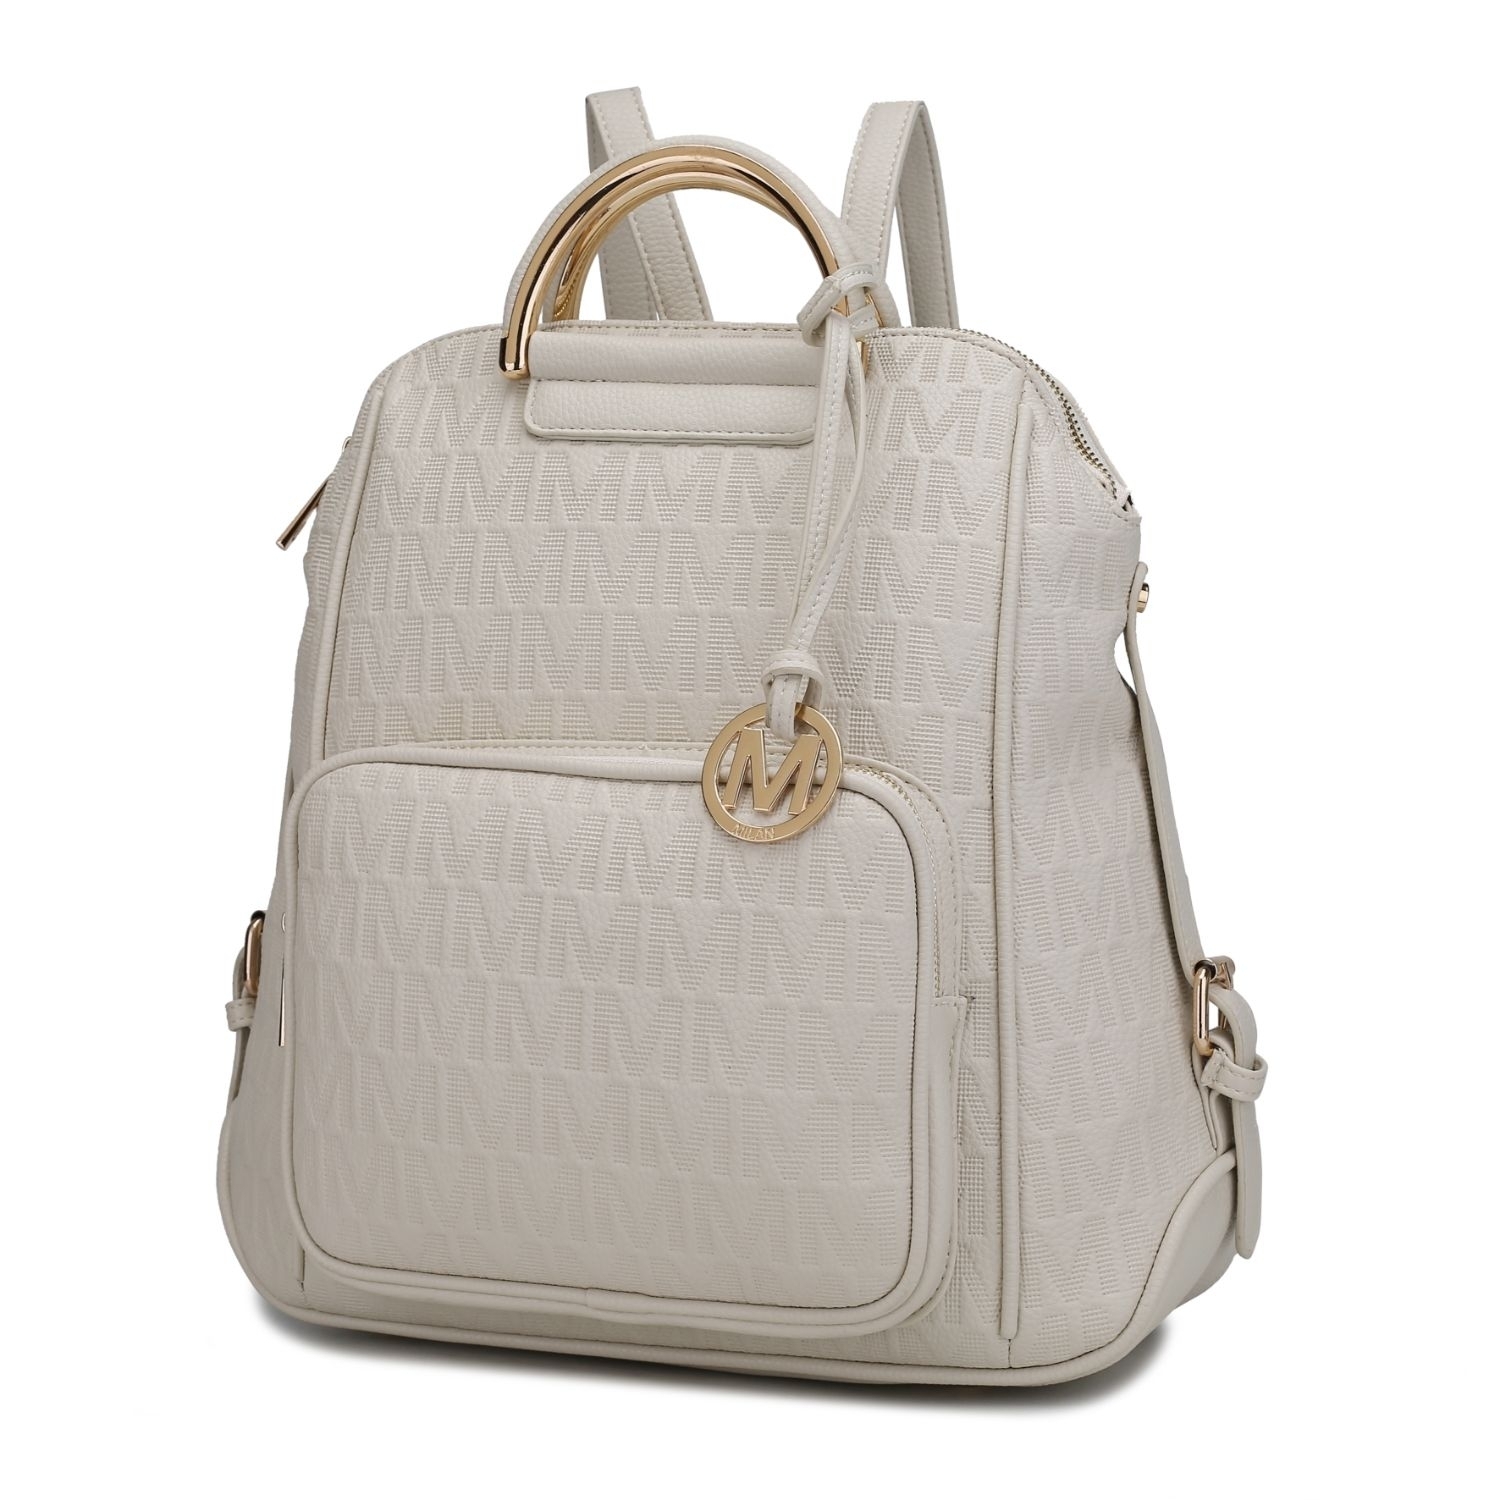 MKF Collection Torra Milan .M. Signature Trendy Backpack By Mia K. - Mustard